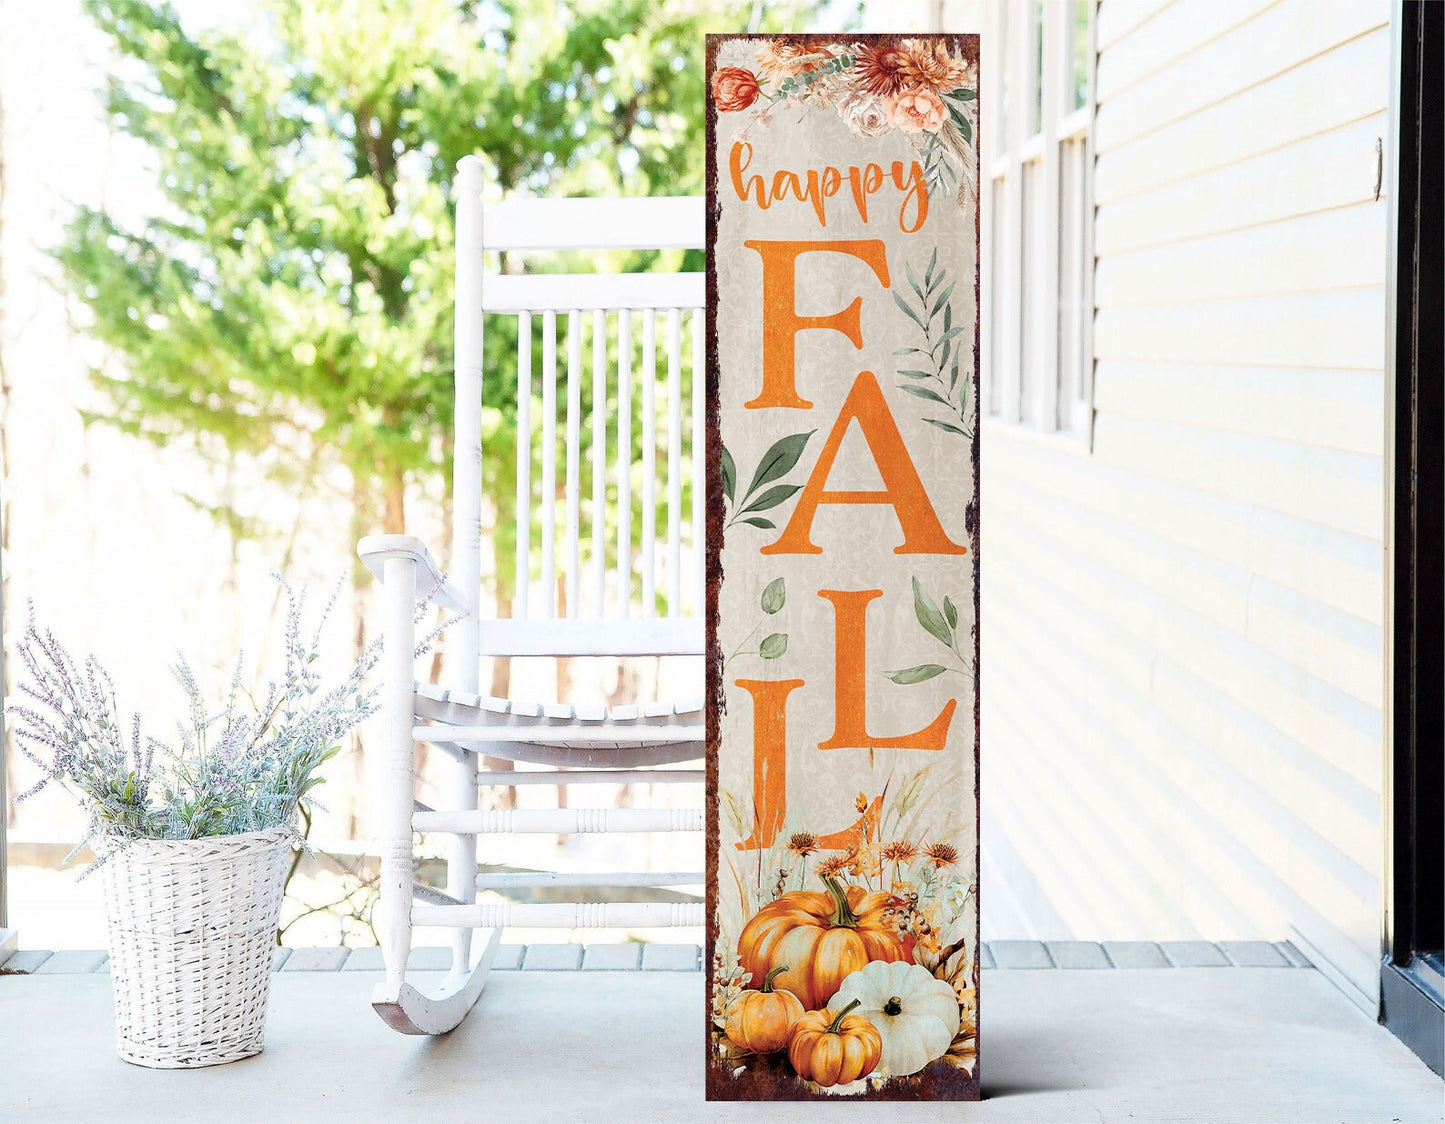 36in Fall Porch Sign, Front Porch Fall Welcome Sign with Vintage Autumn Decoration, Rustic Modern Farmhouse Entryway Porch Decor